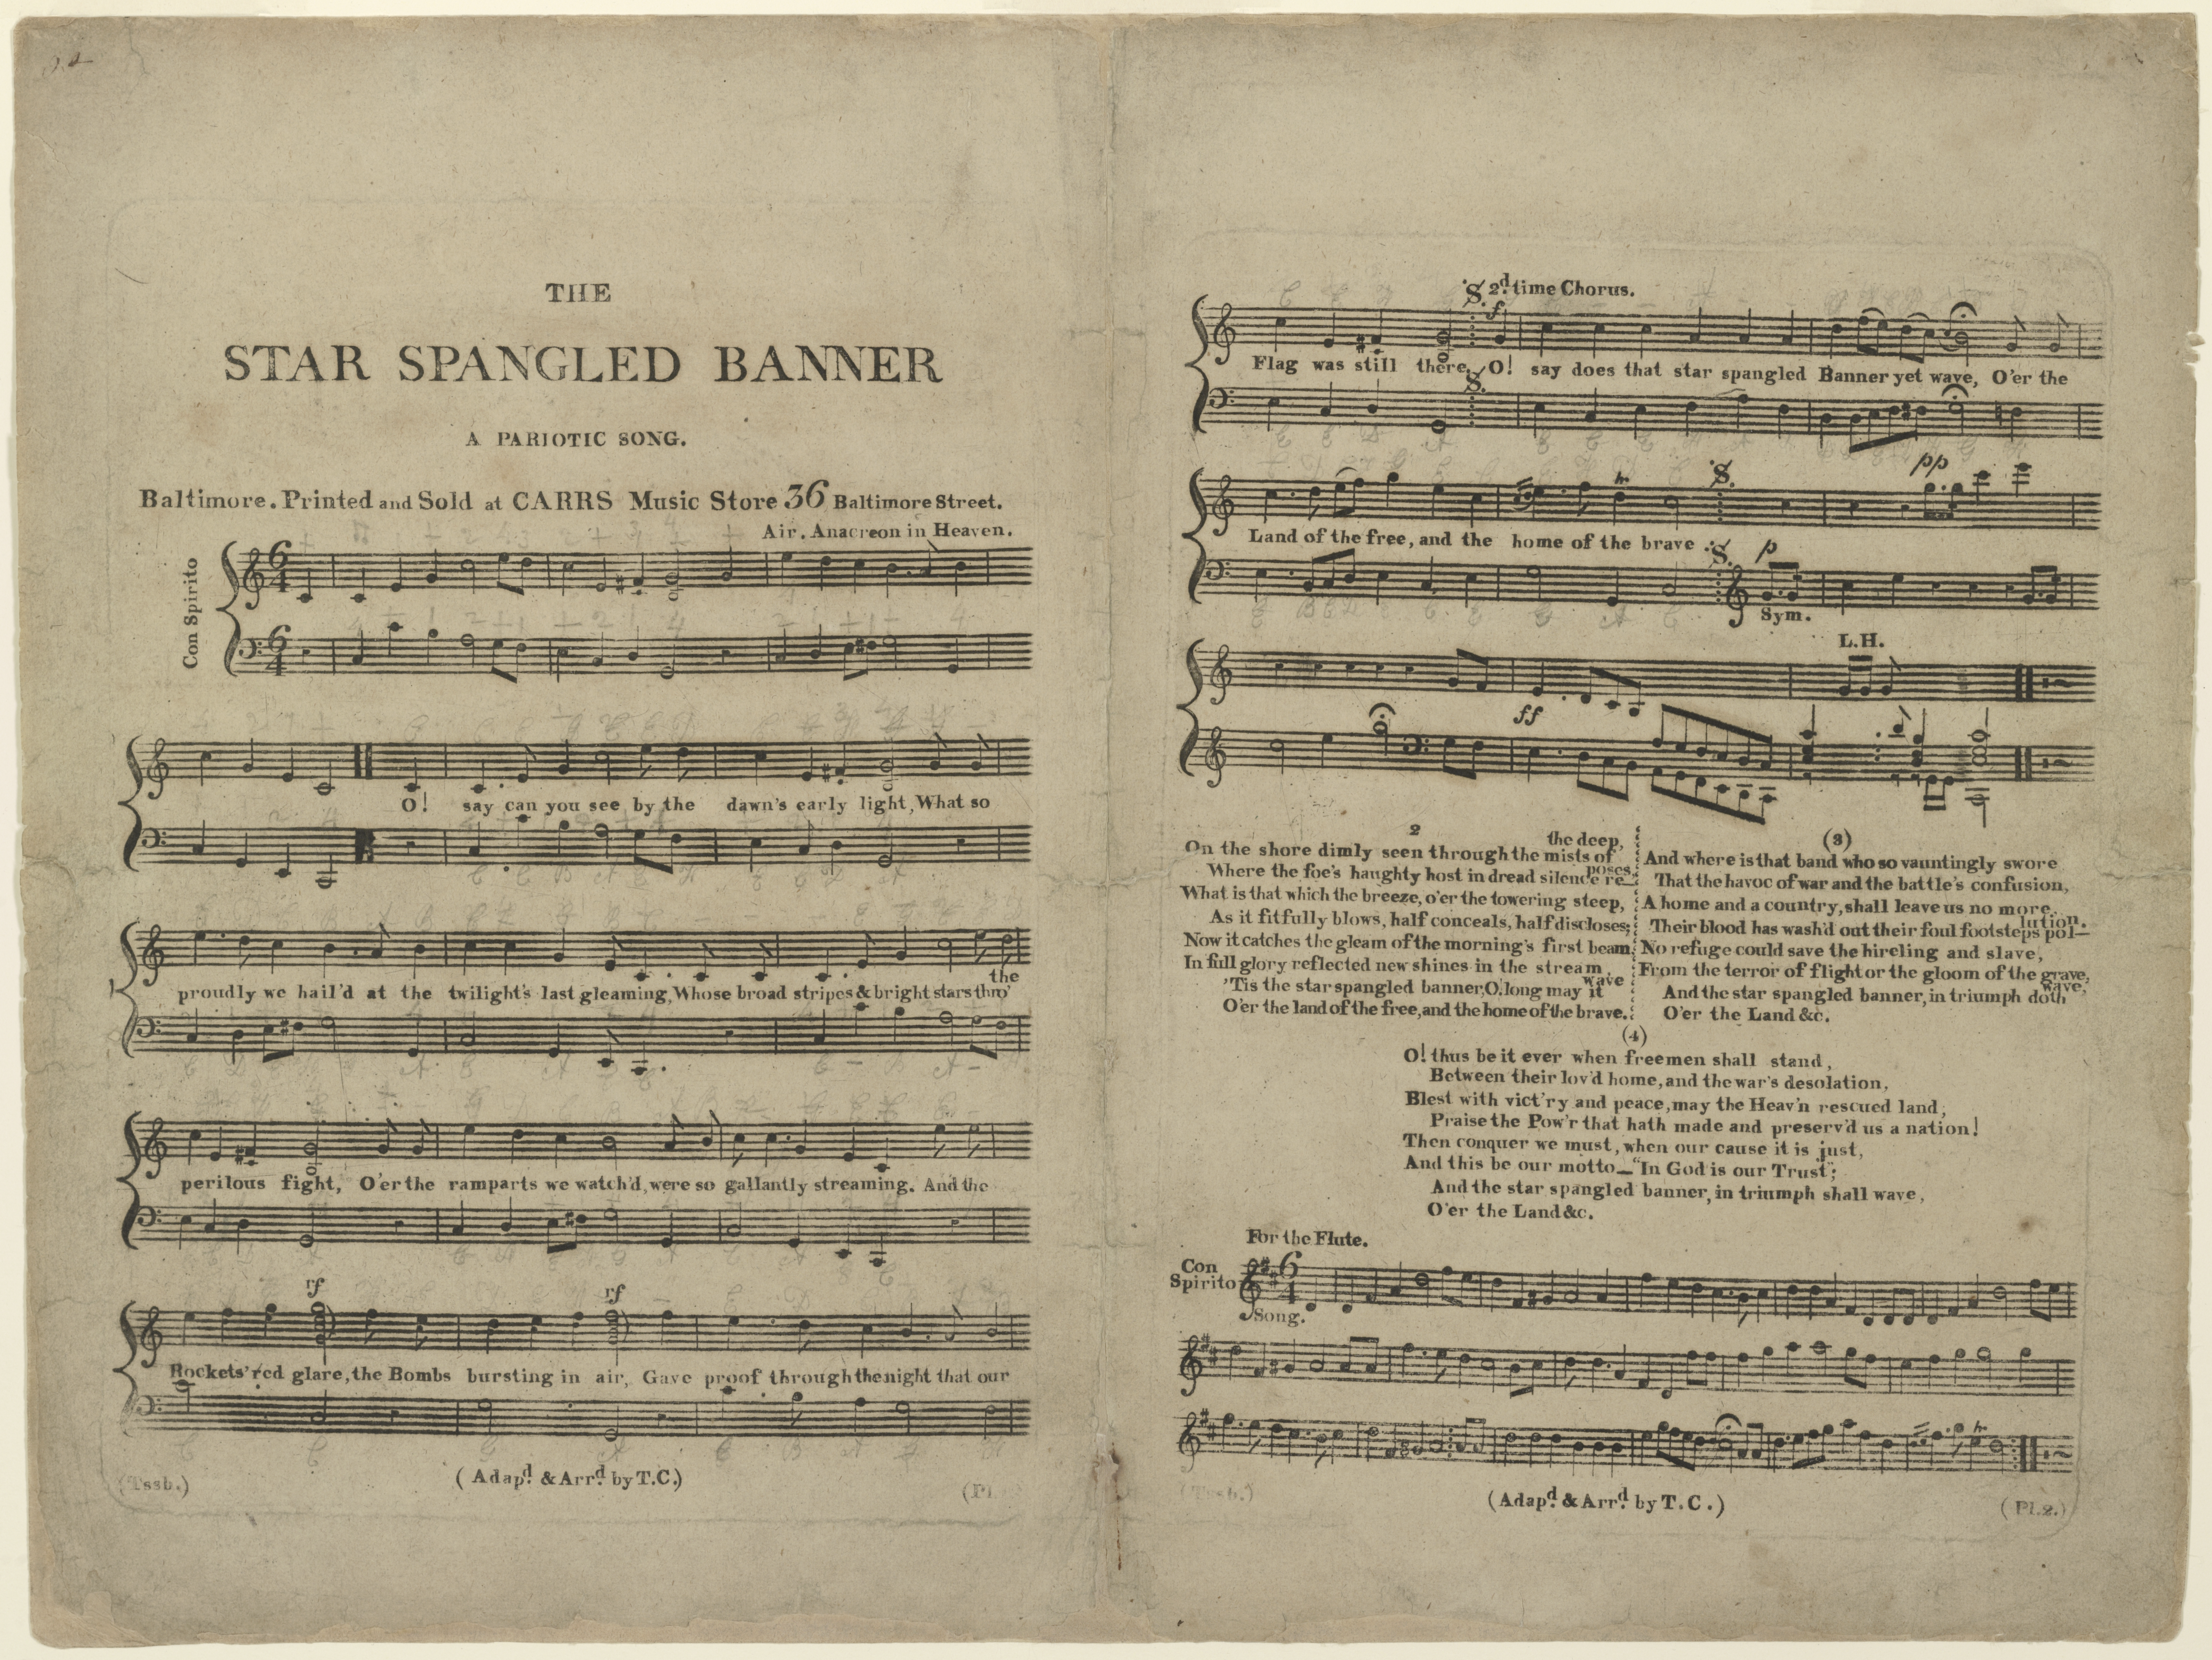 The Star-Spangled Banner in 1814